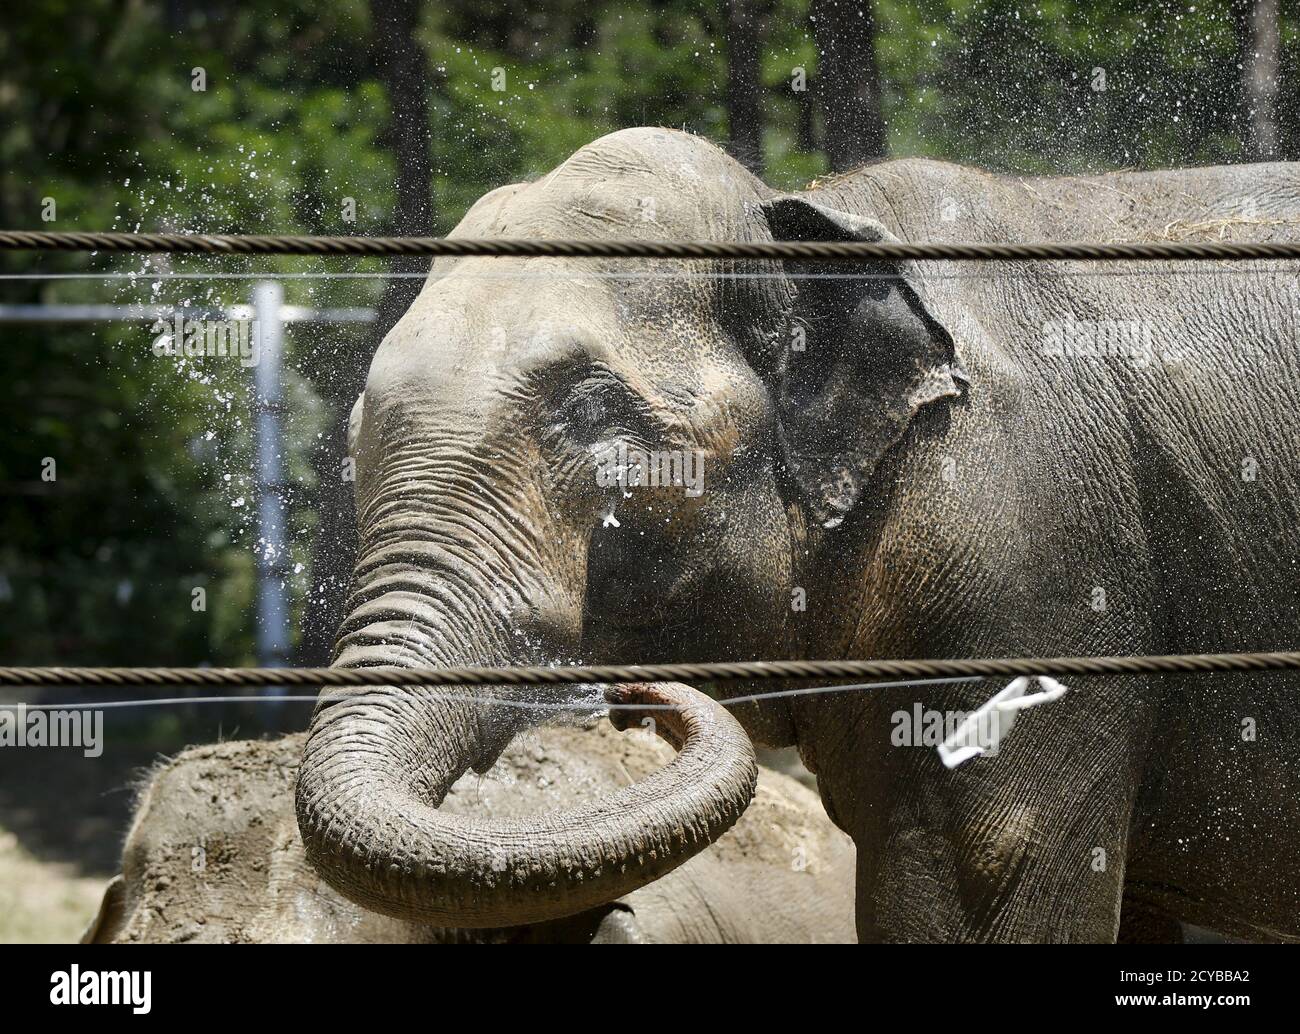 An elephant sprays water to cool itself inside its enclosure at a zoo,  which is partially destroyed, in Tbilisi, Georgia, June 18, 2015. A tiger,  one of dozens of animals that escaped